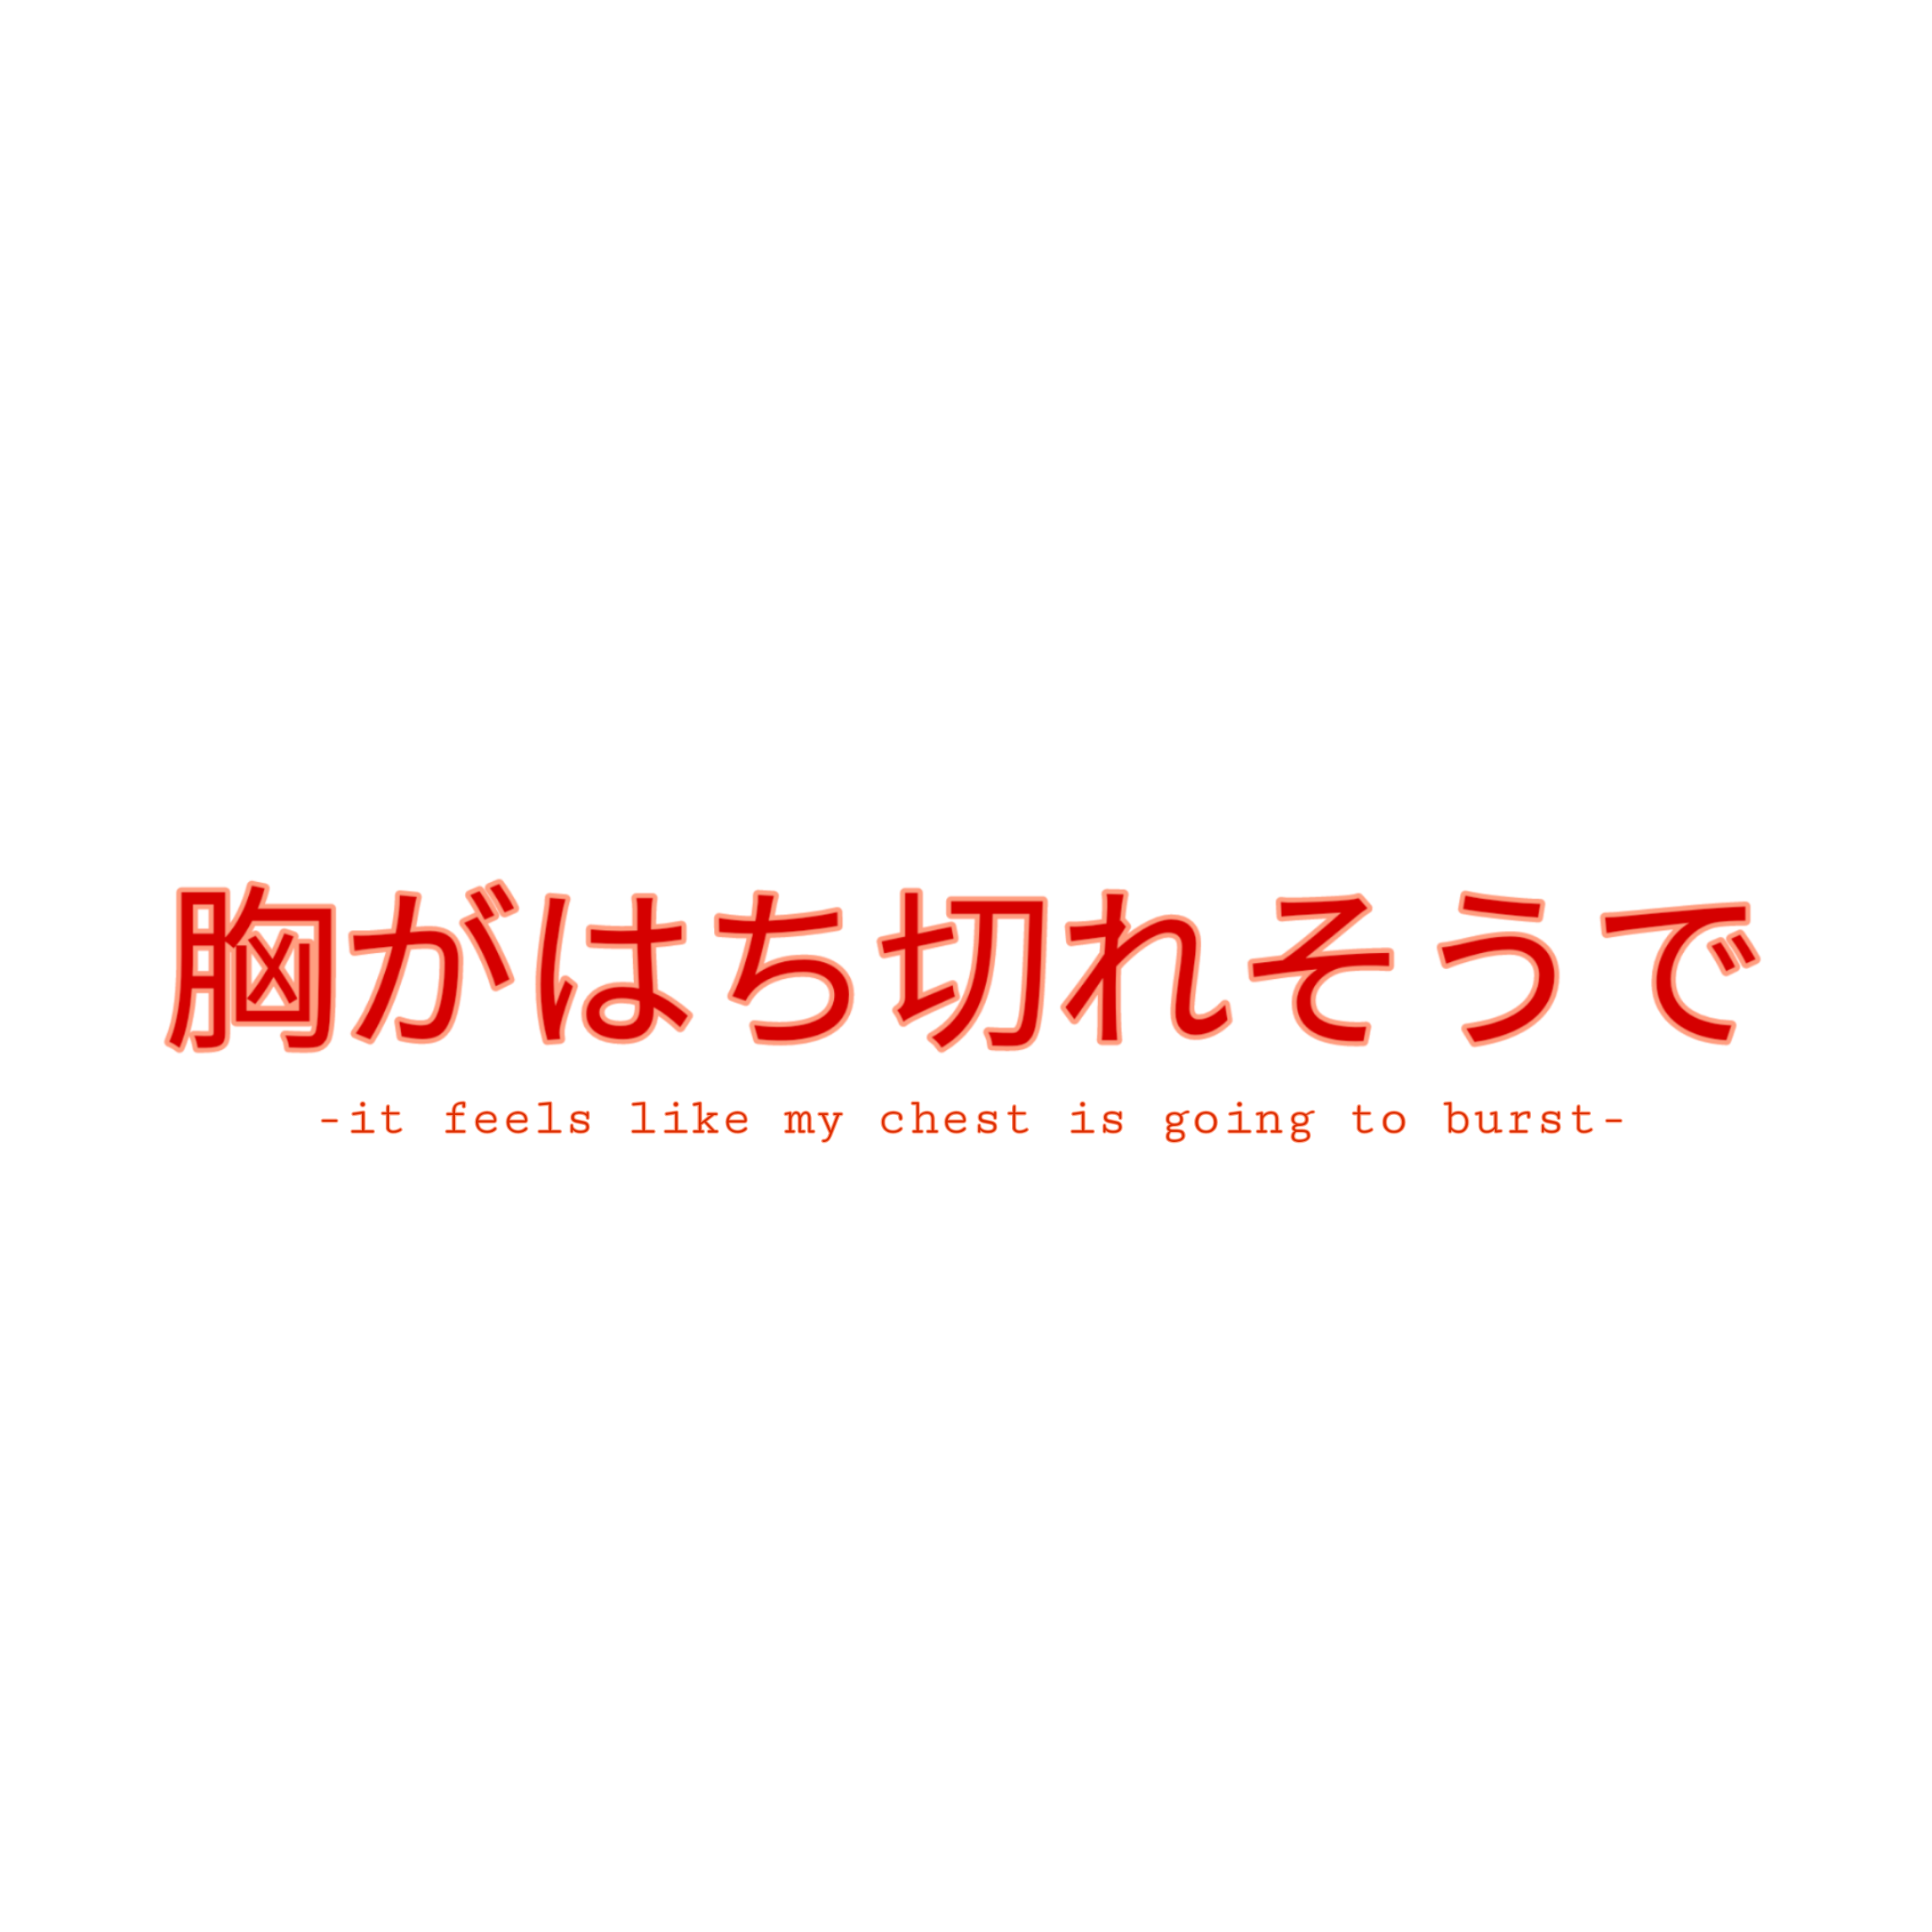 Japanese Aesthetic Theme Quotes PNG File